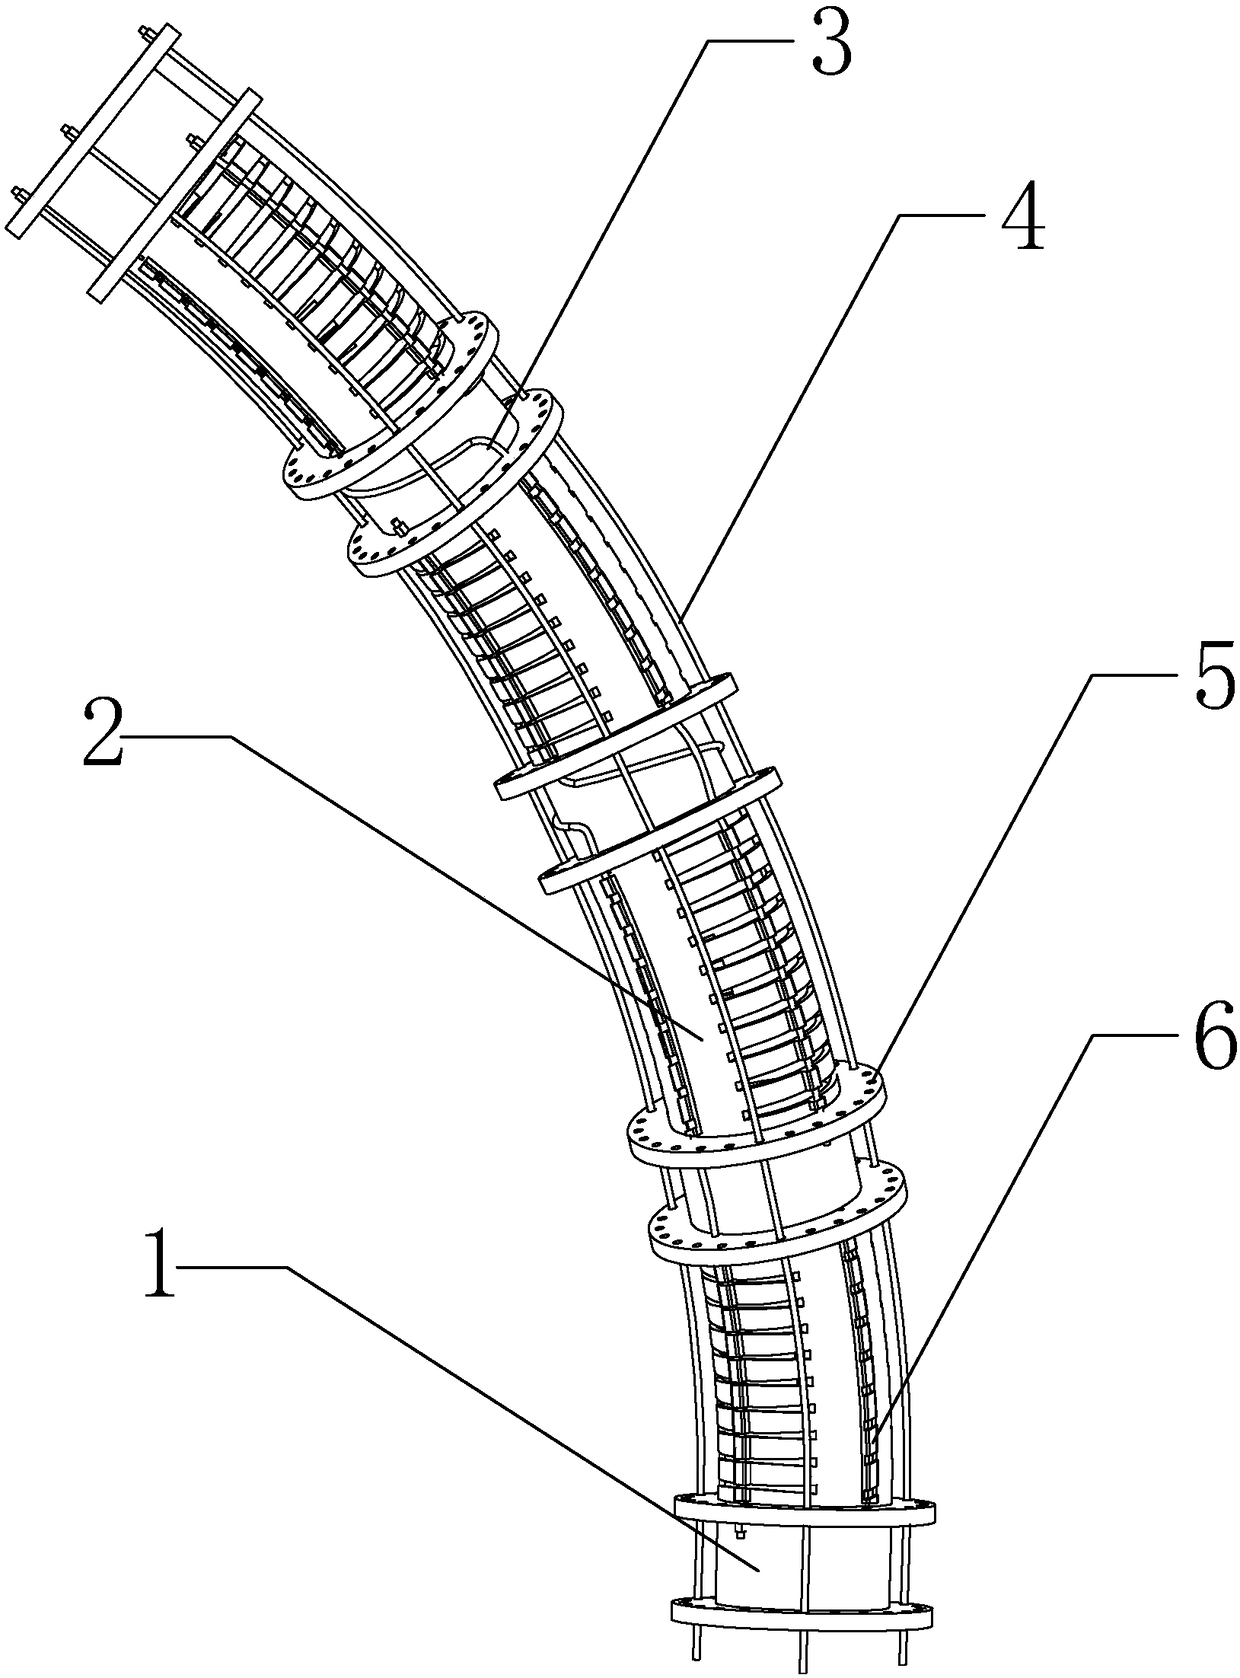 Double-degree-of-freedom linkage rope-driven joint group of flexible mechanical arm